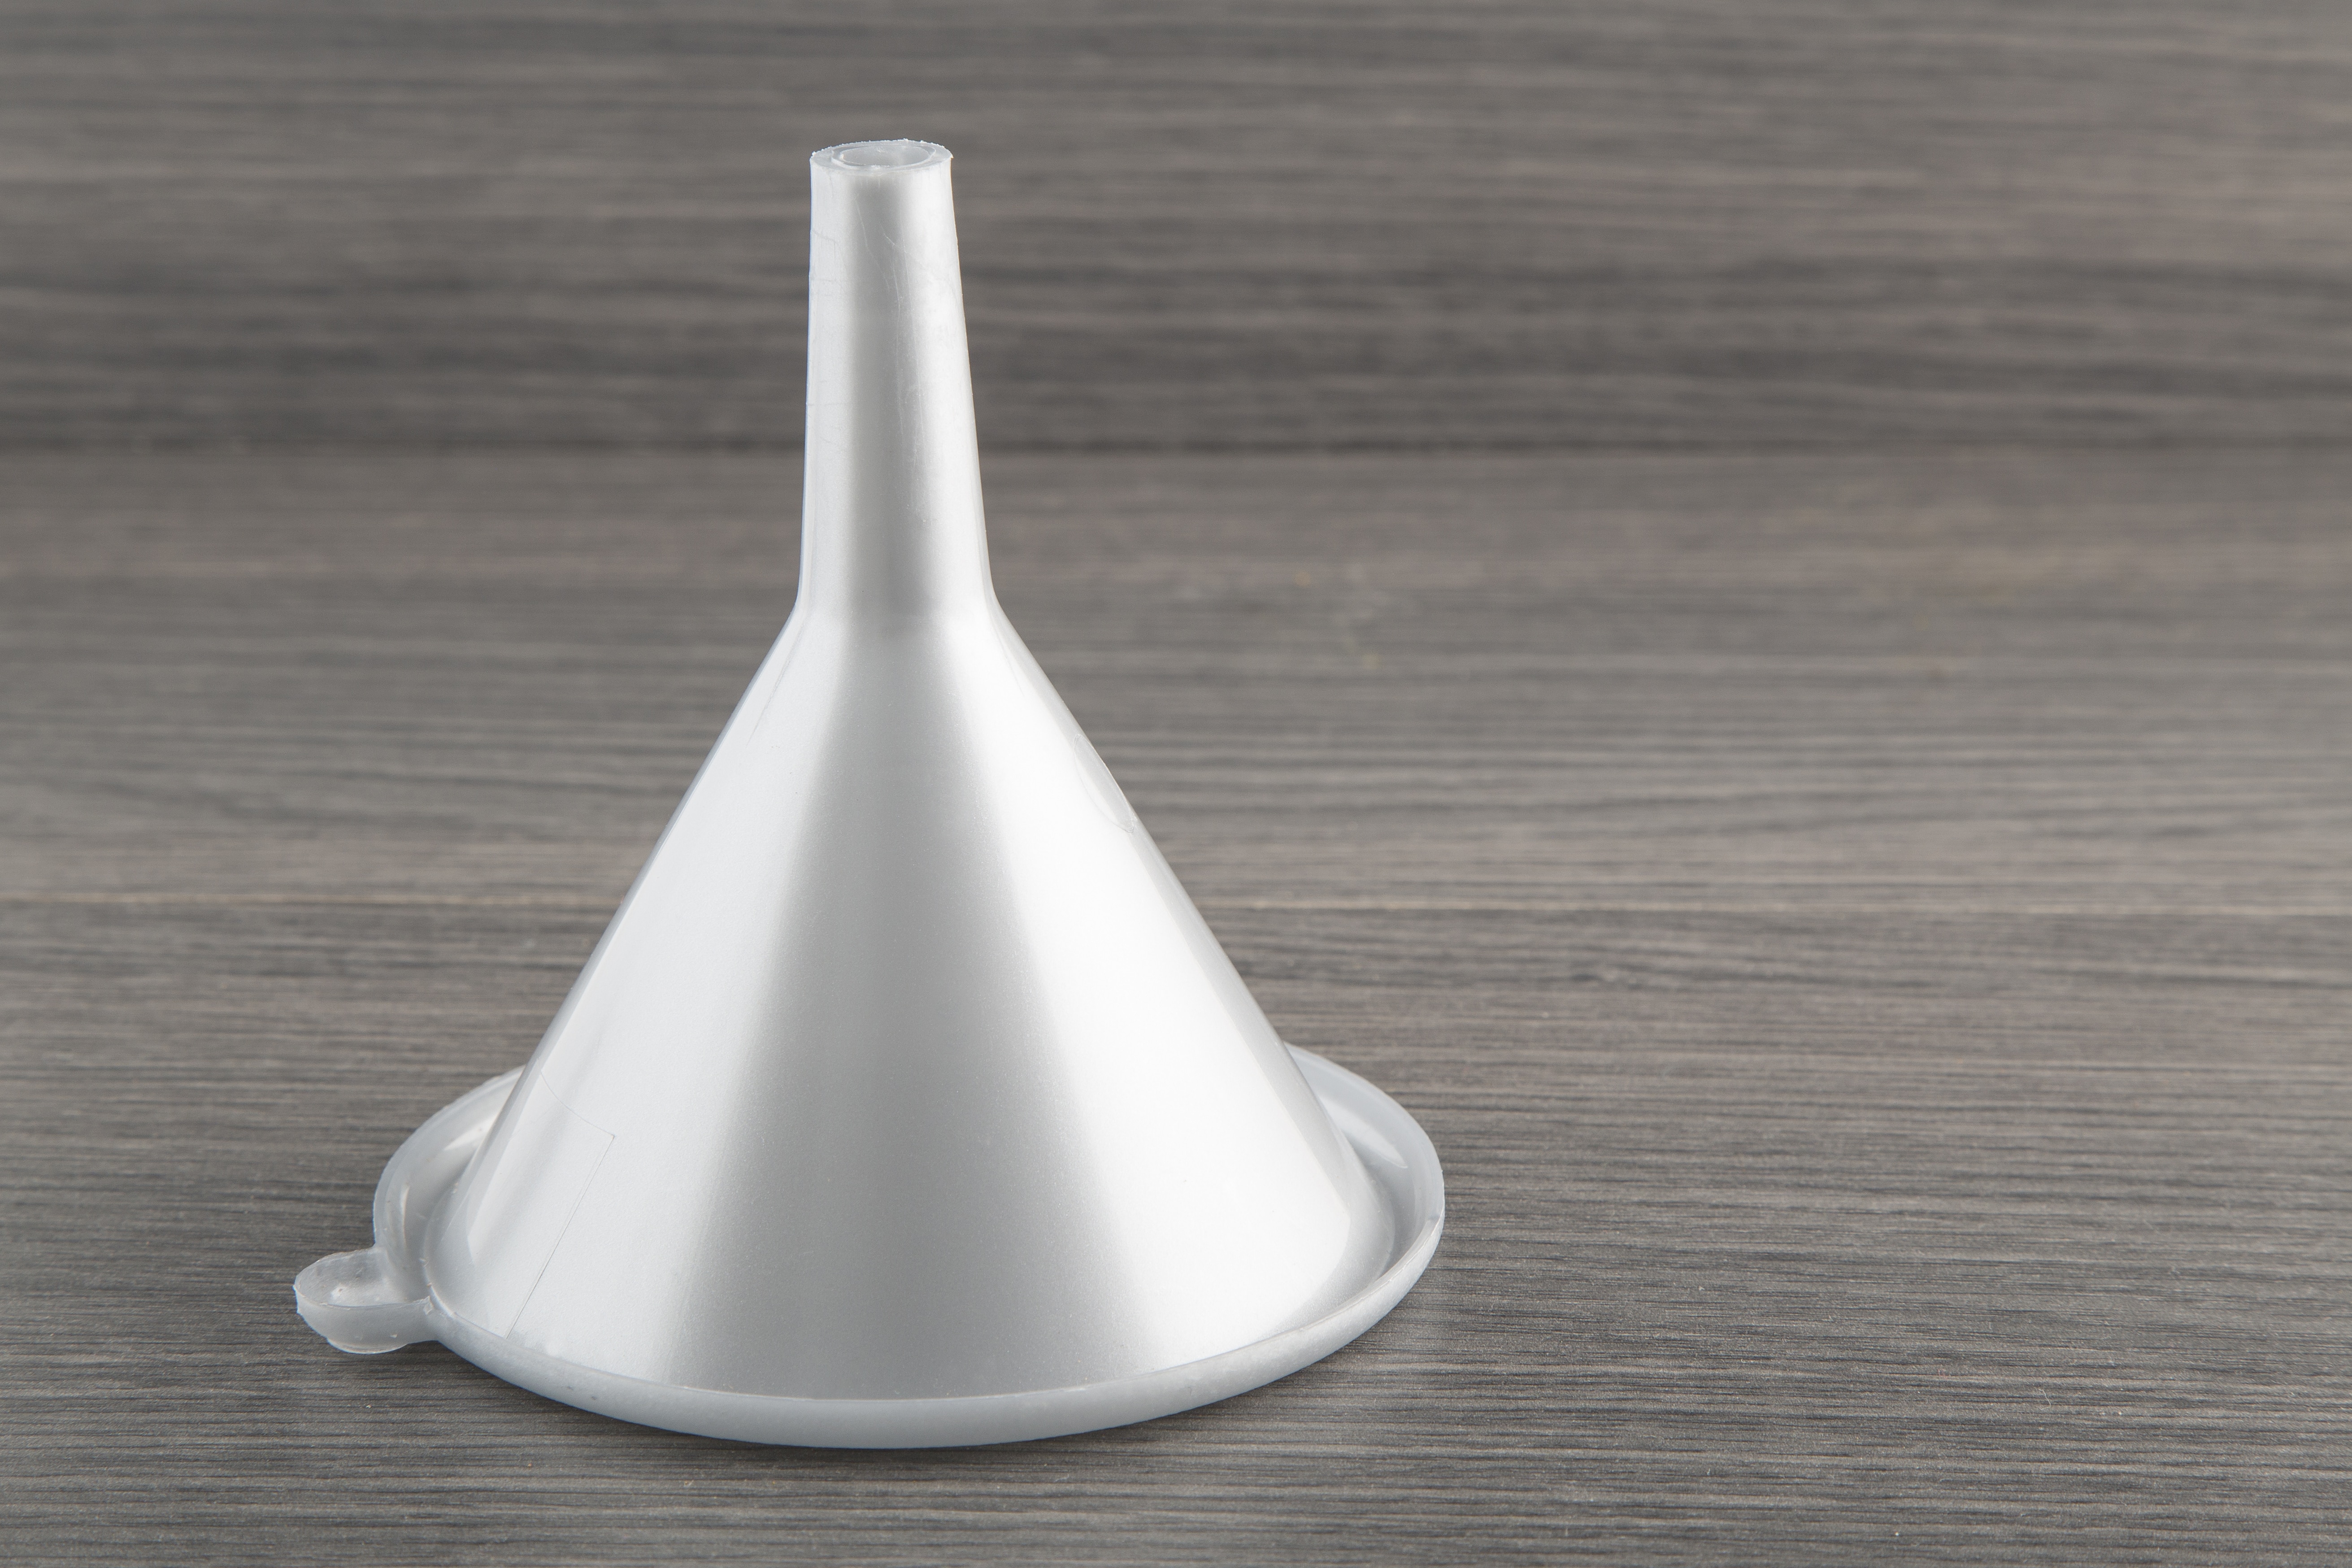 plastic funnel on wooden background